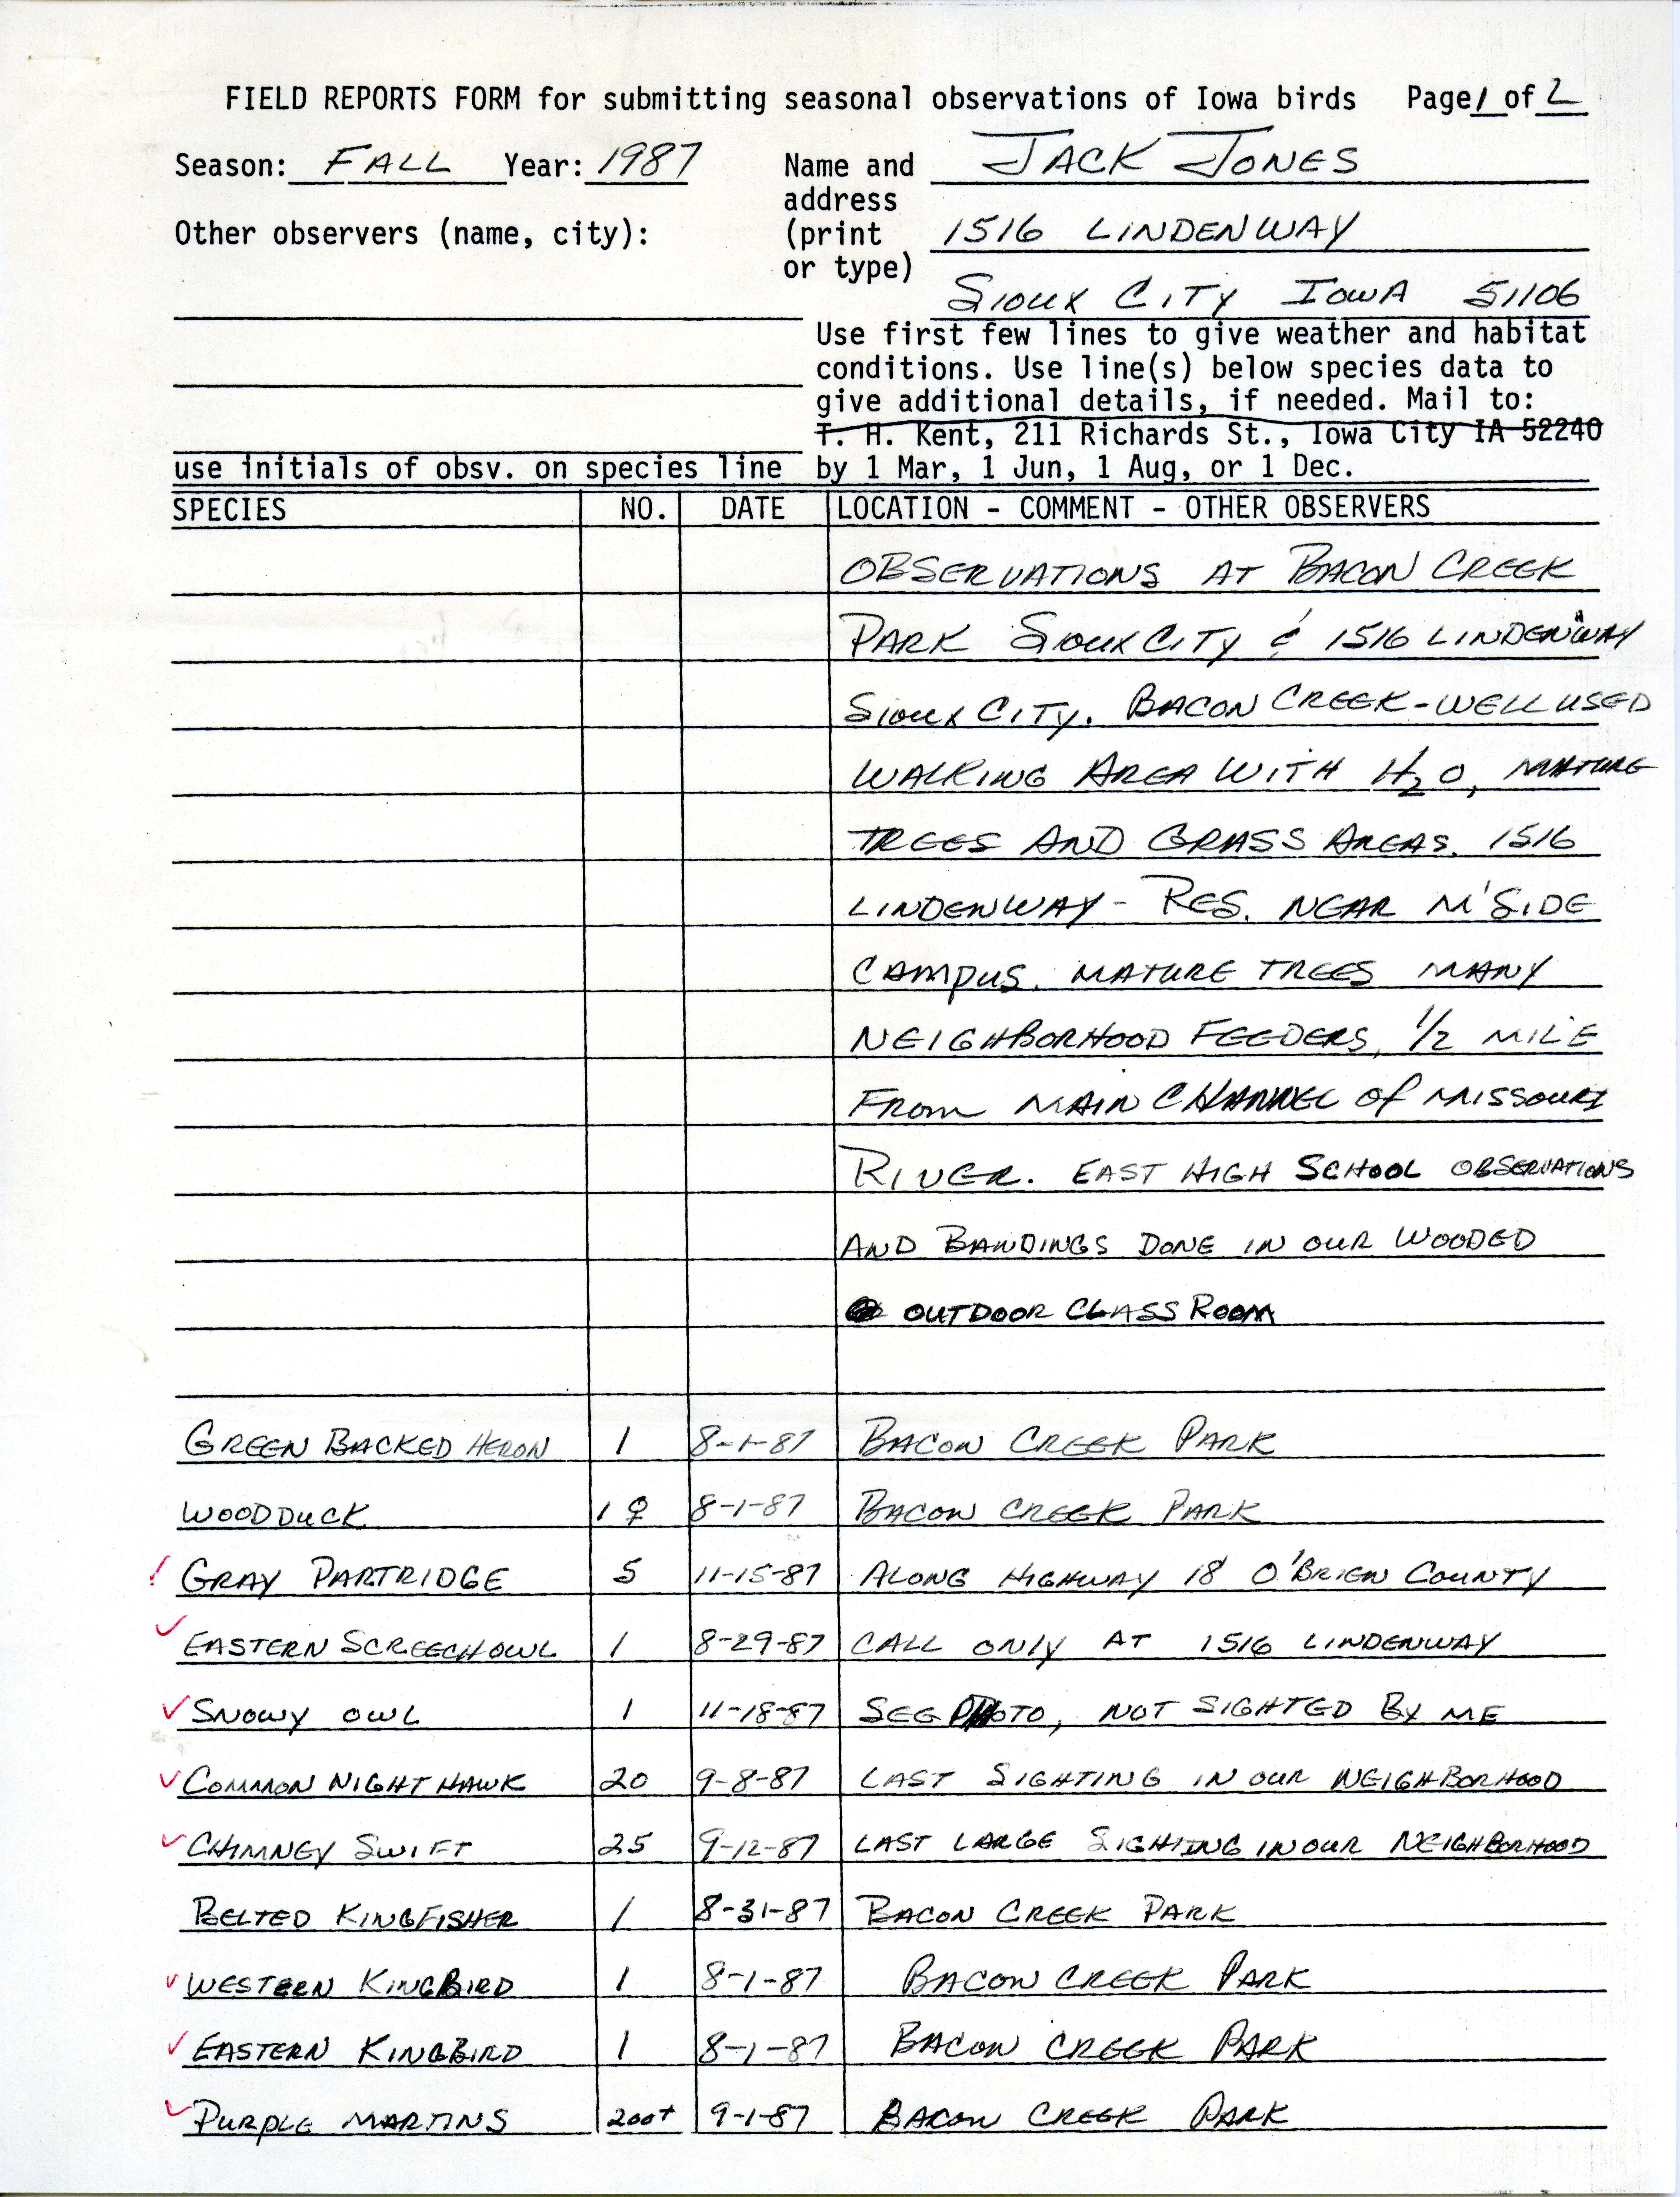 Field reports form for submitting seasonal observations of Iowa birds and photograph of a Snowy Owl, Jack Jones, fall 1987